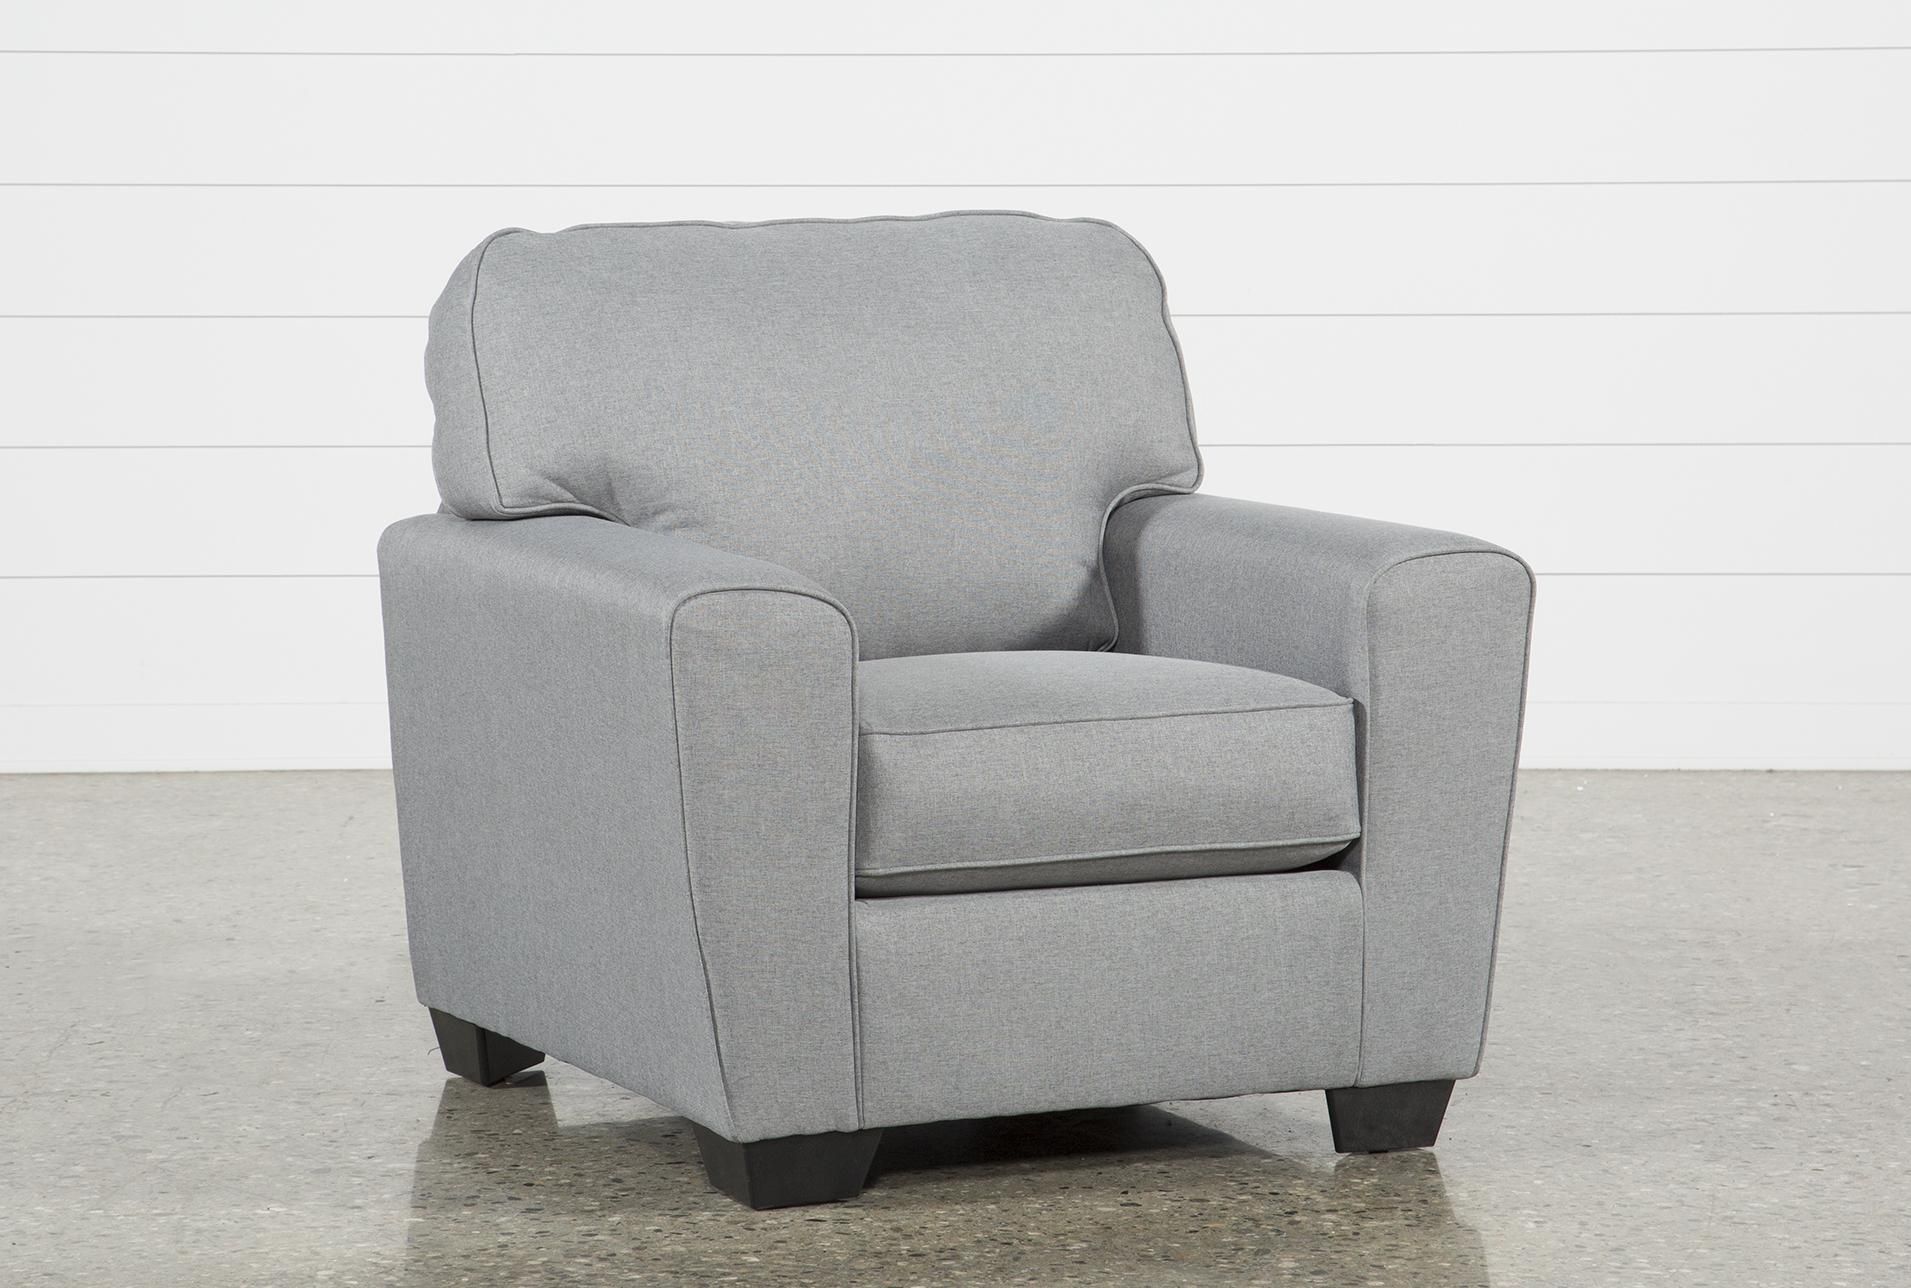 Elevate Your Living Room with the Mcdade
Ash Sofa Chairs